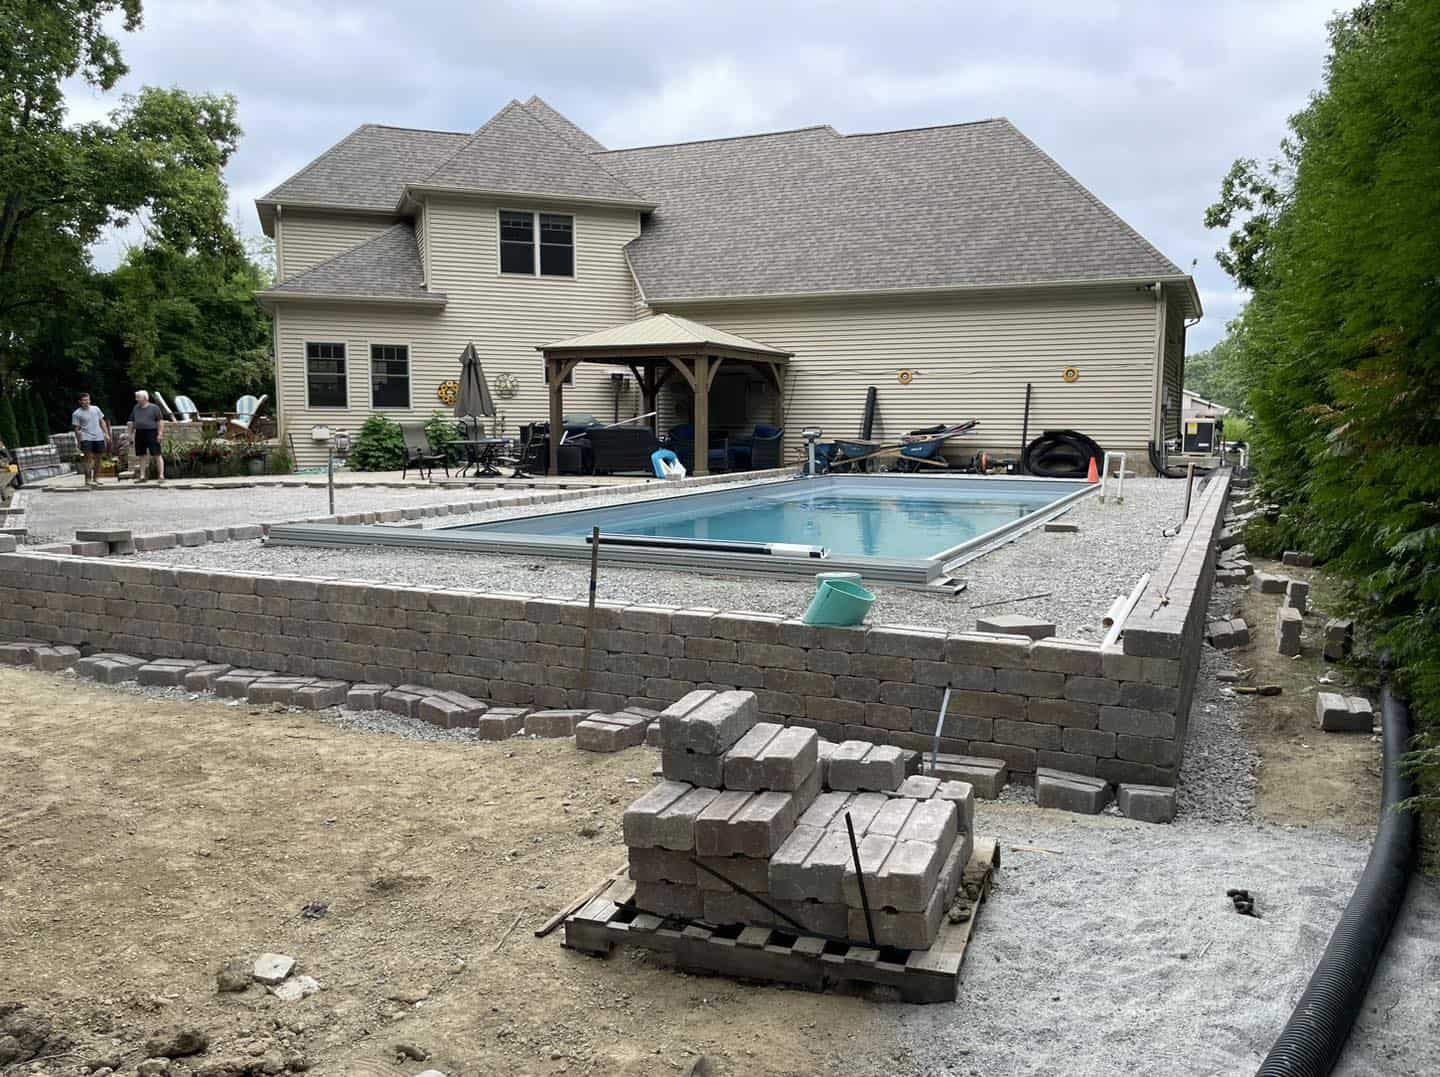 A swimming pool being built in front of a house.